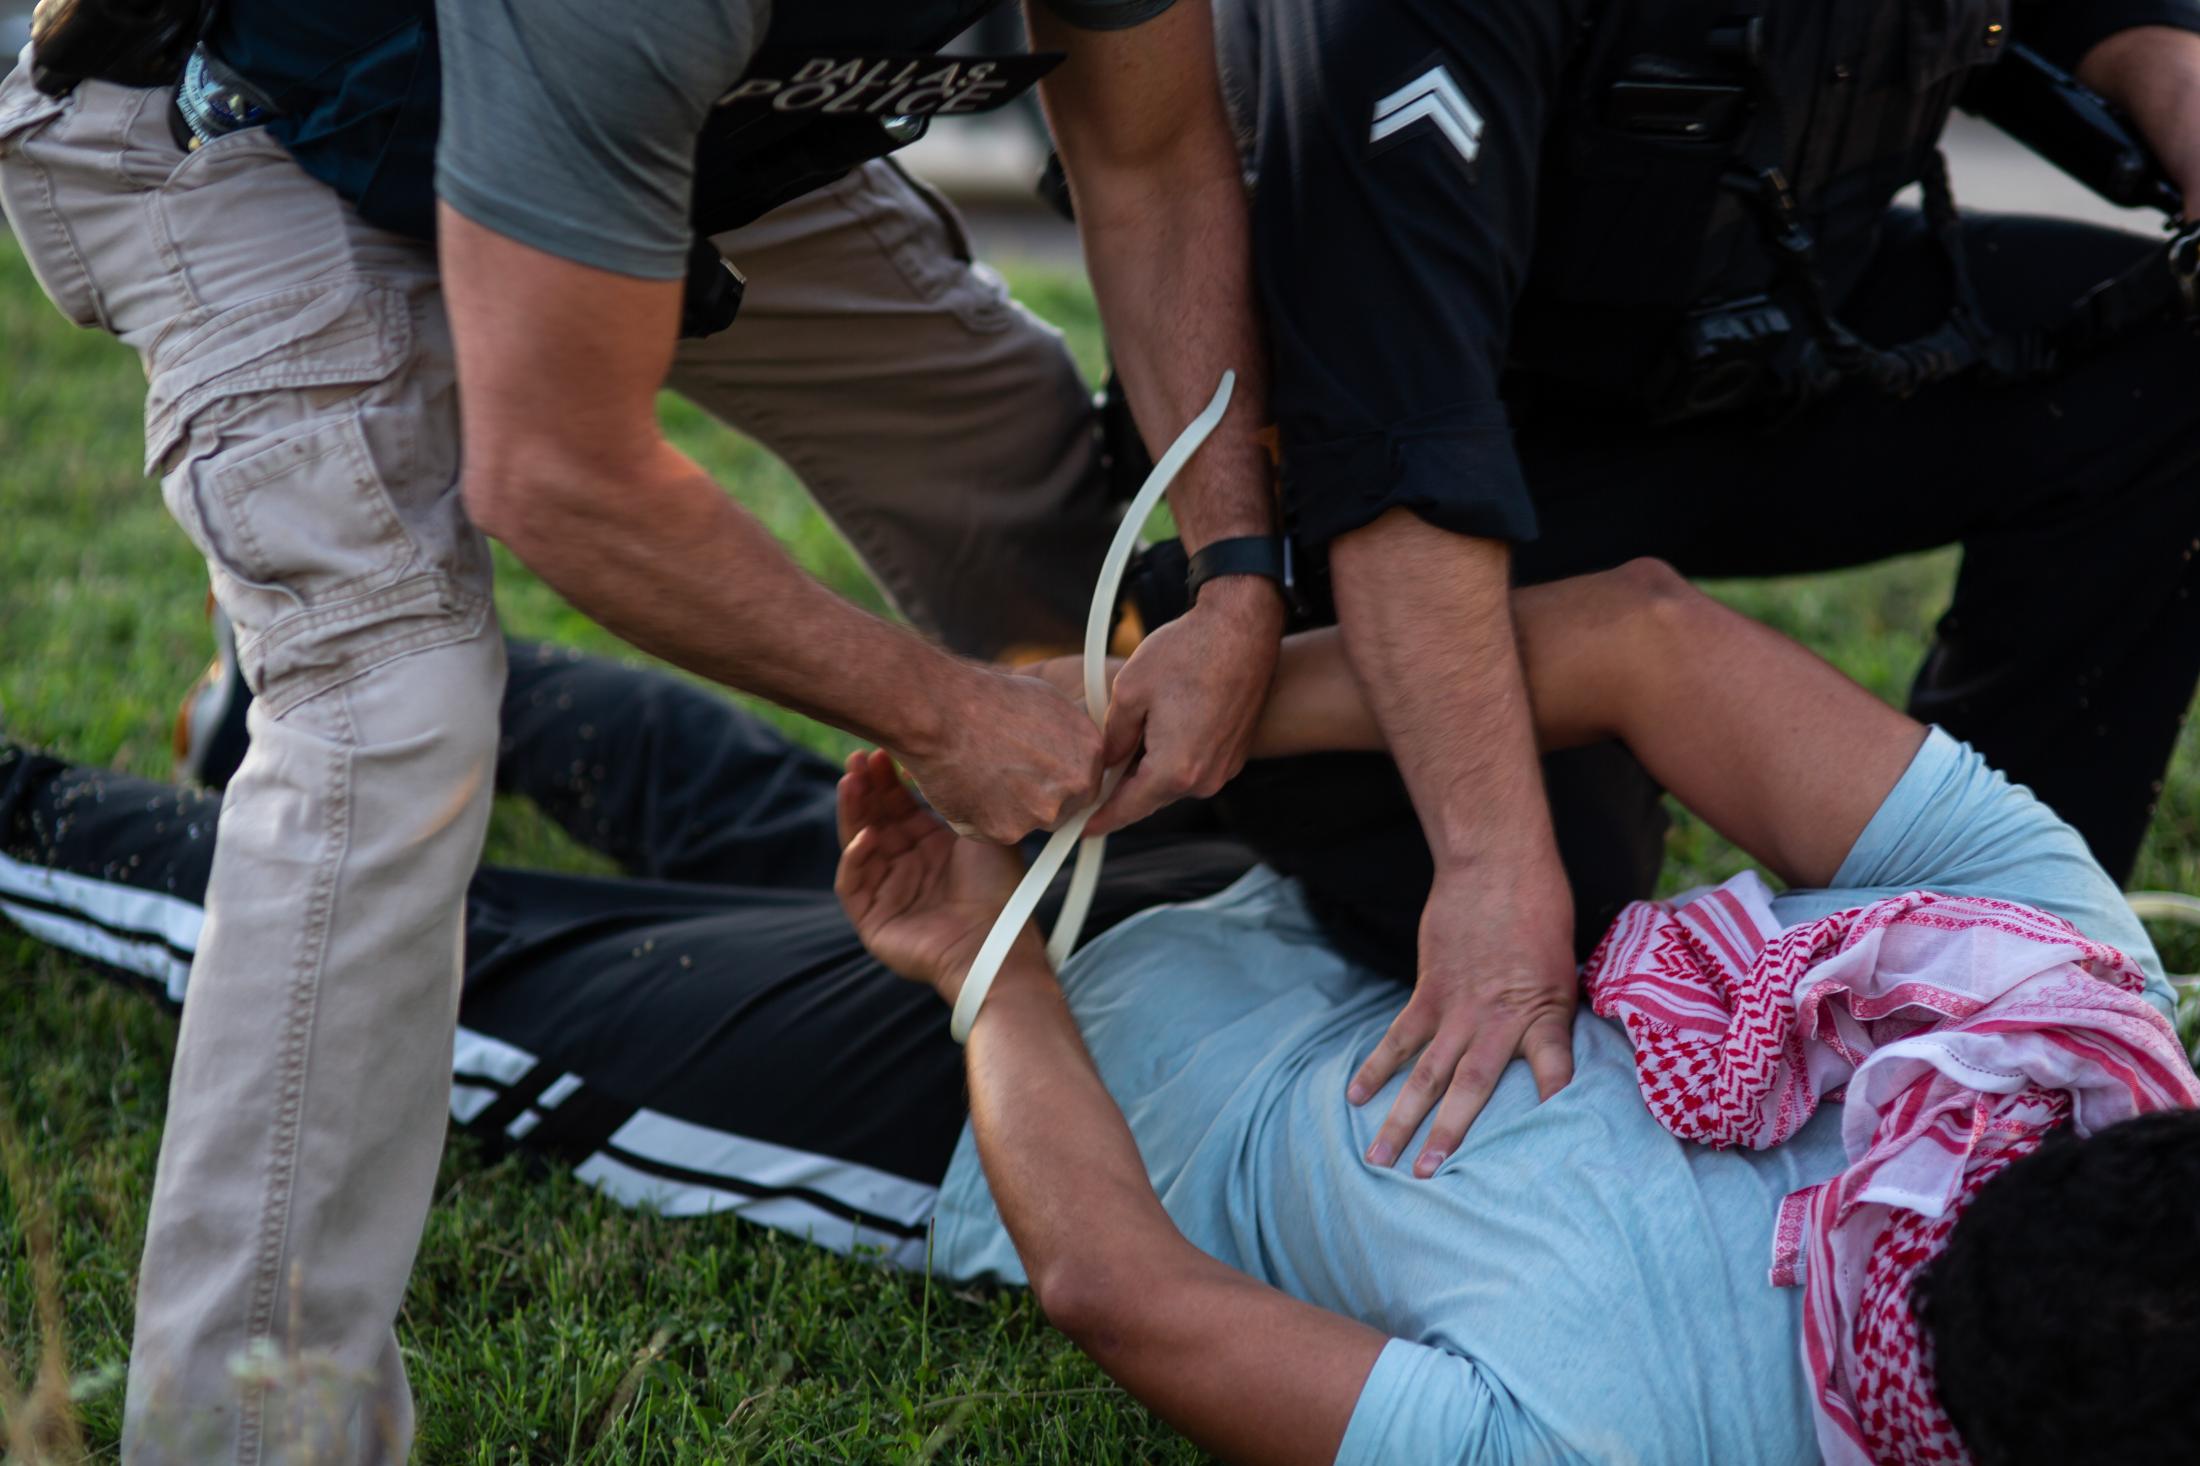 Unrest Dallas - A man is cuffed with other protesters by Dallas Police...